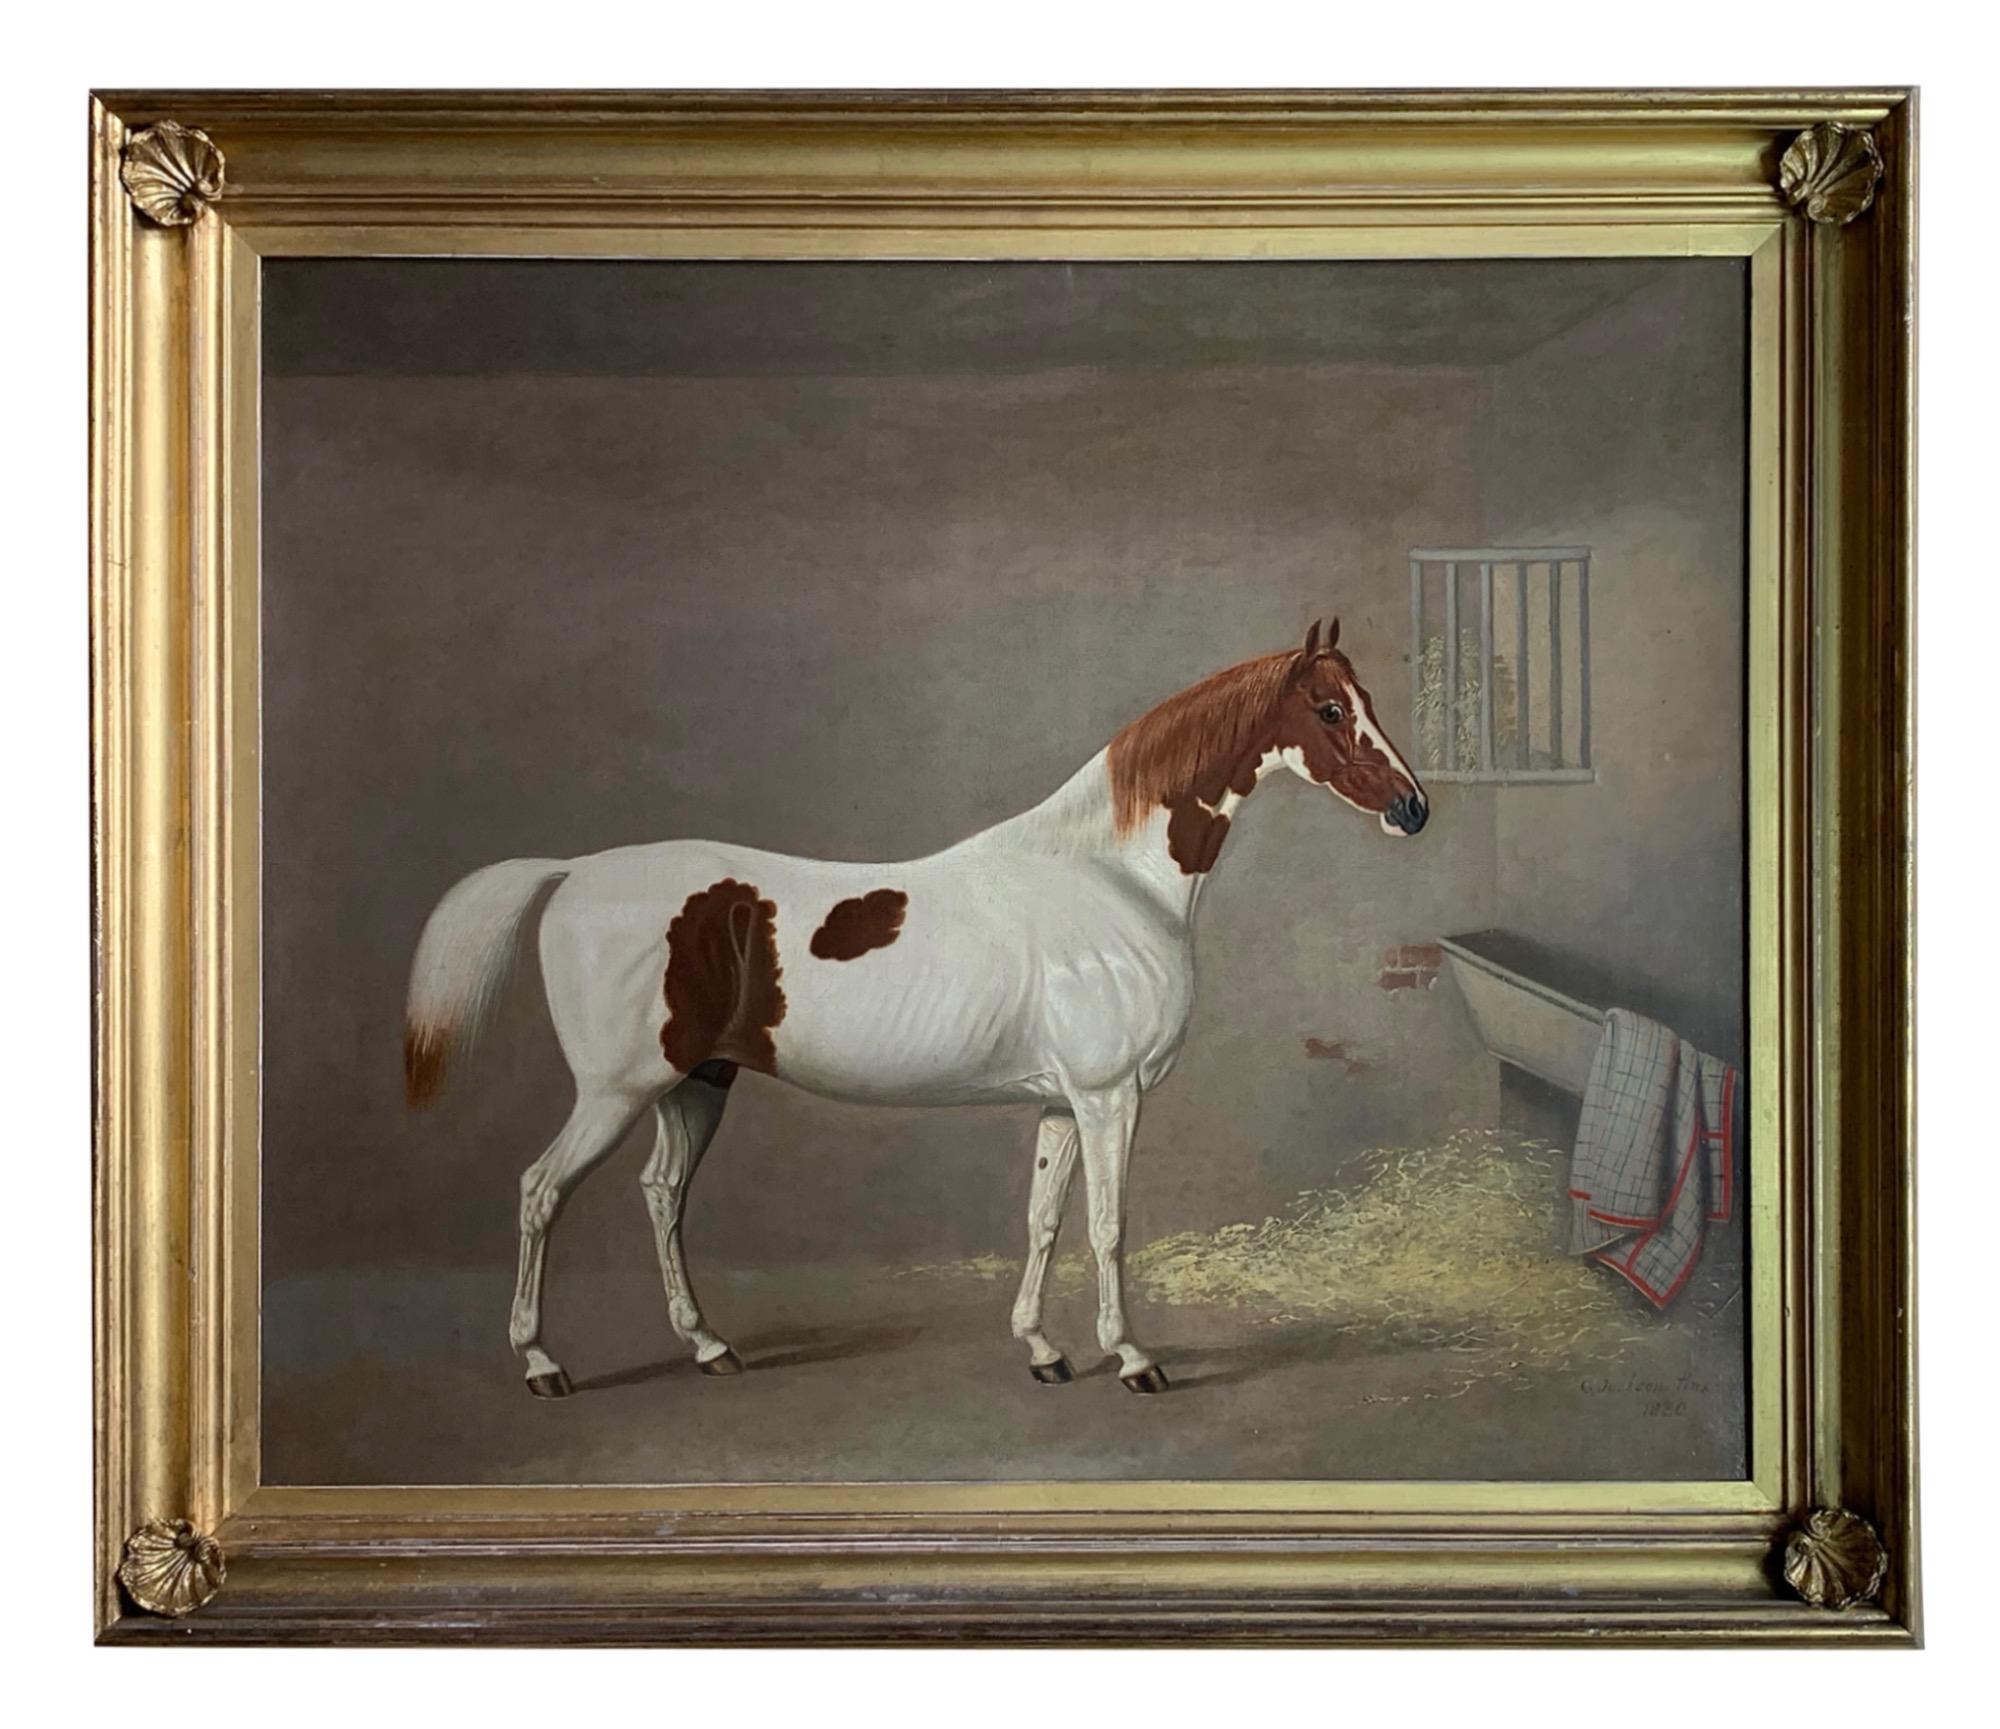 G. JACKSON Interior Painting - A Skewbald Pony in a Stable by G. Jackson